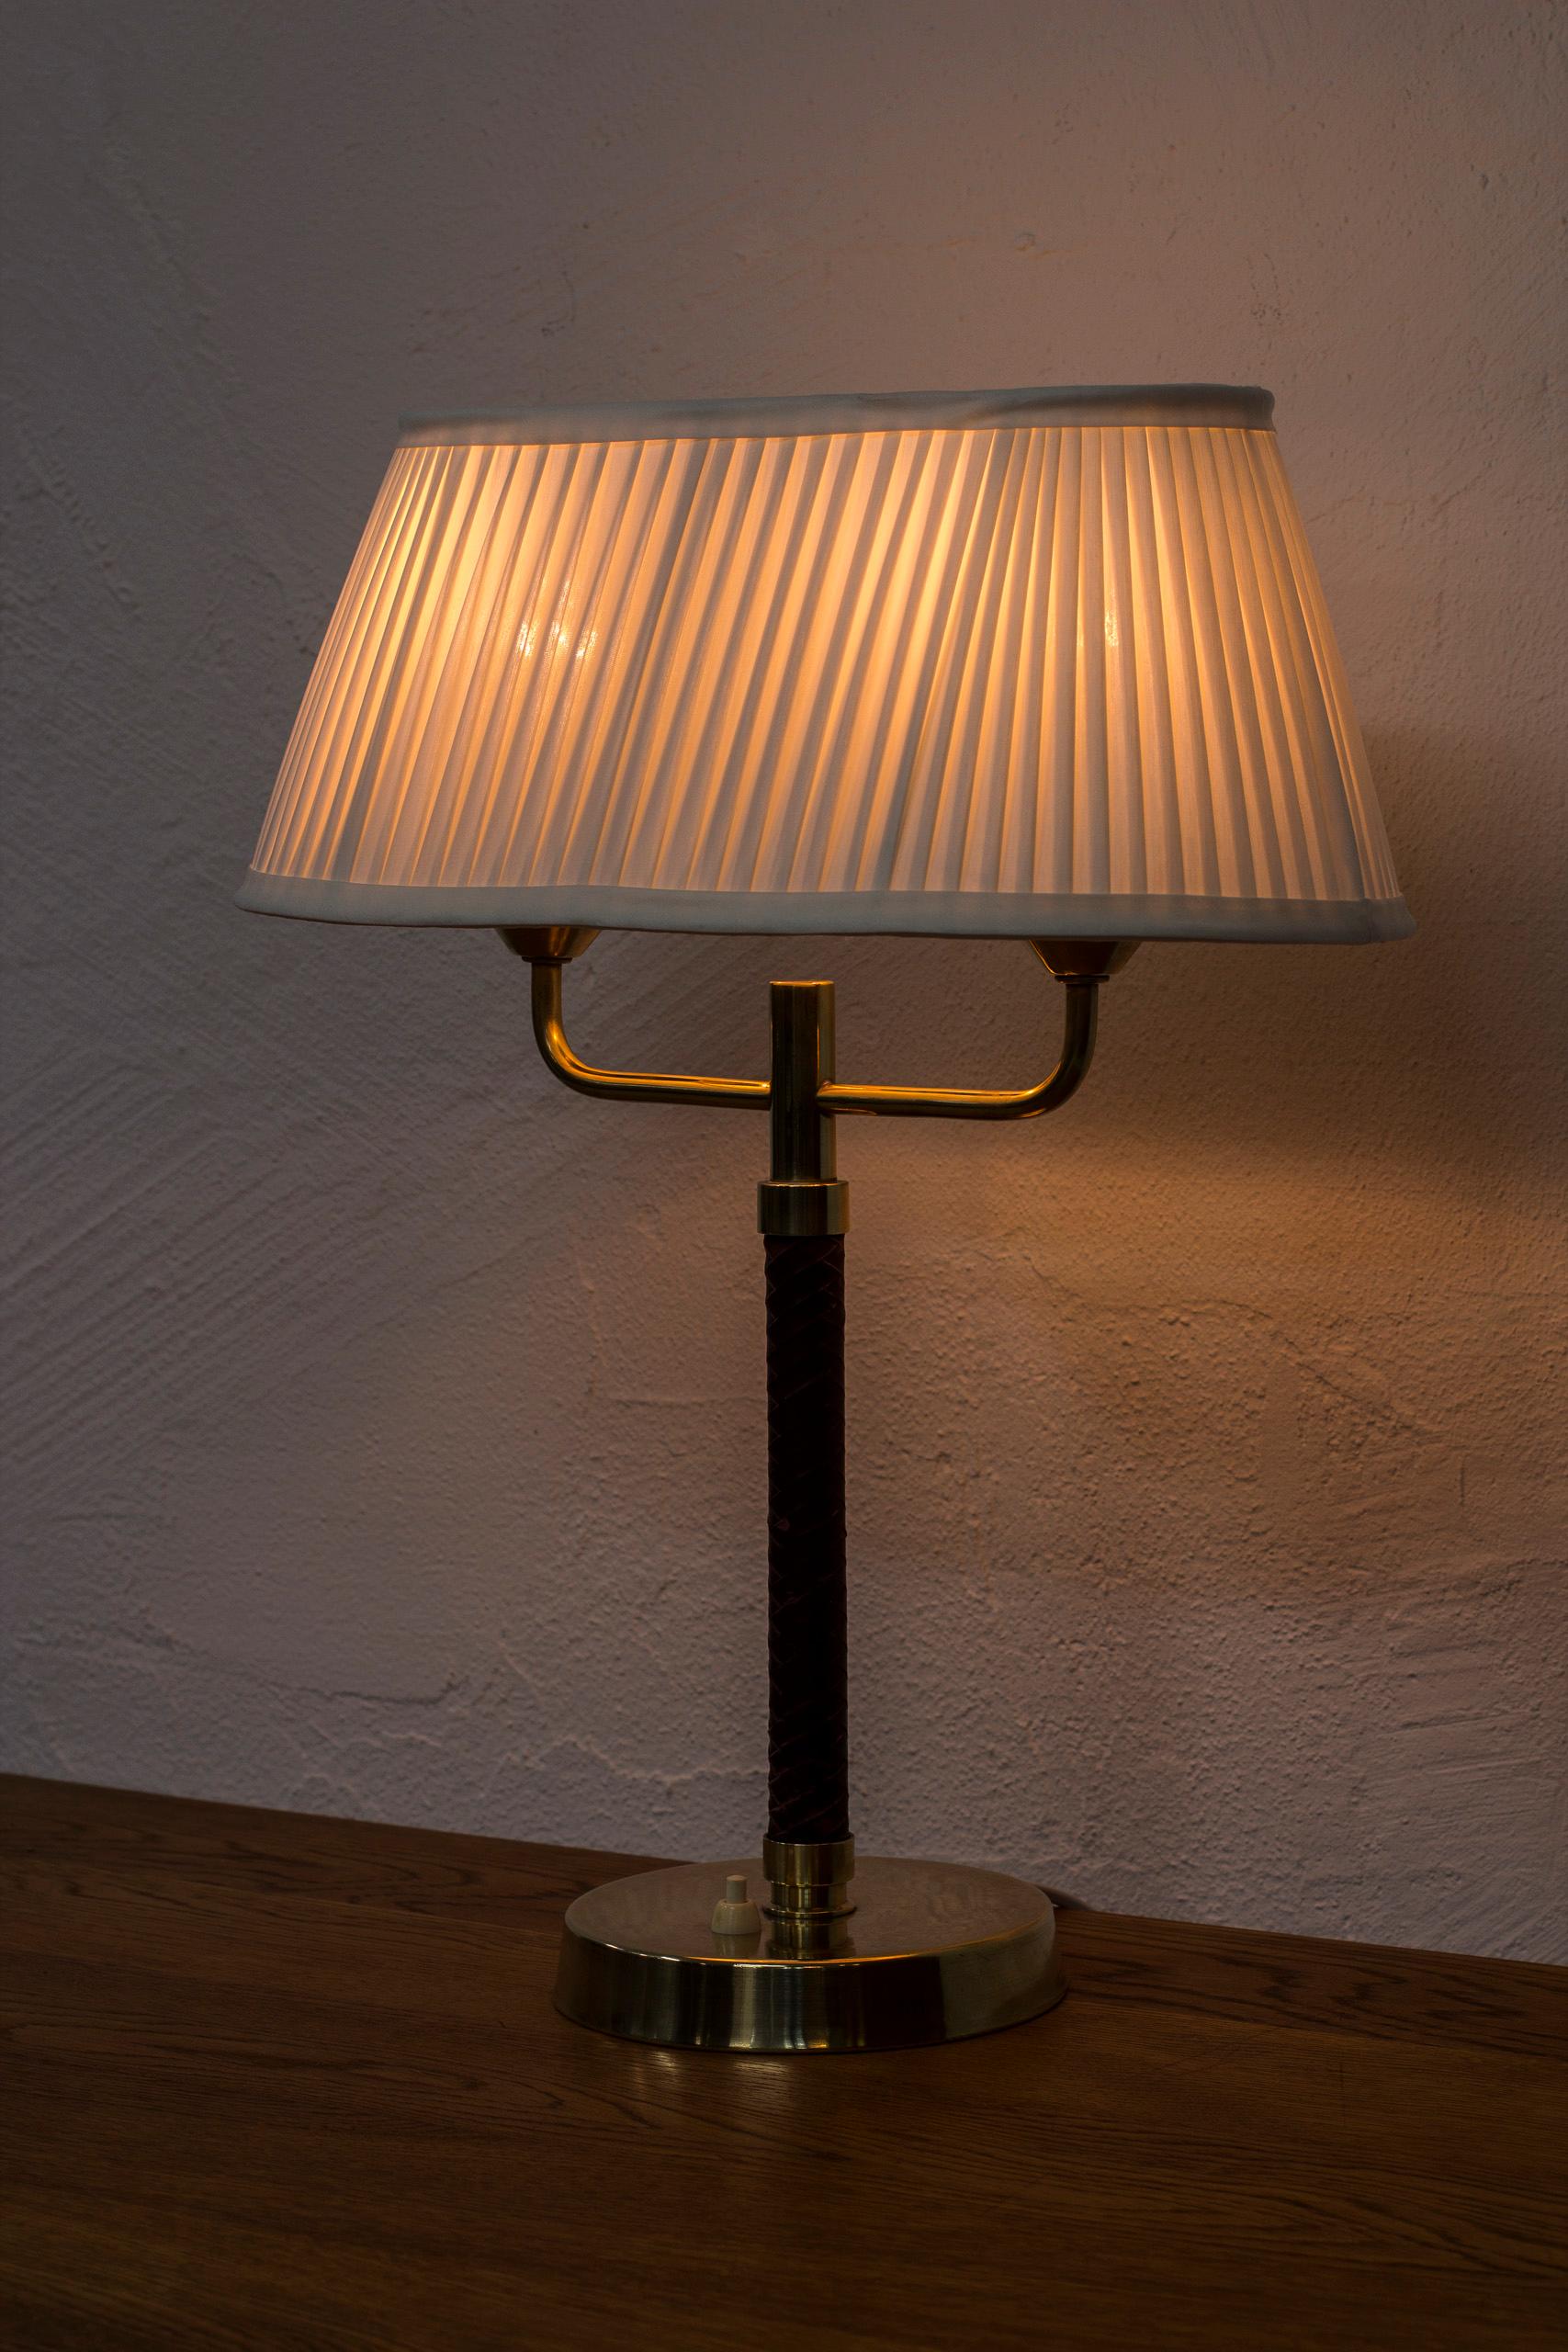 Brass Table Lamp Produced by Karlskrona Lampfabrik in Sweden, 1940s-1950s